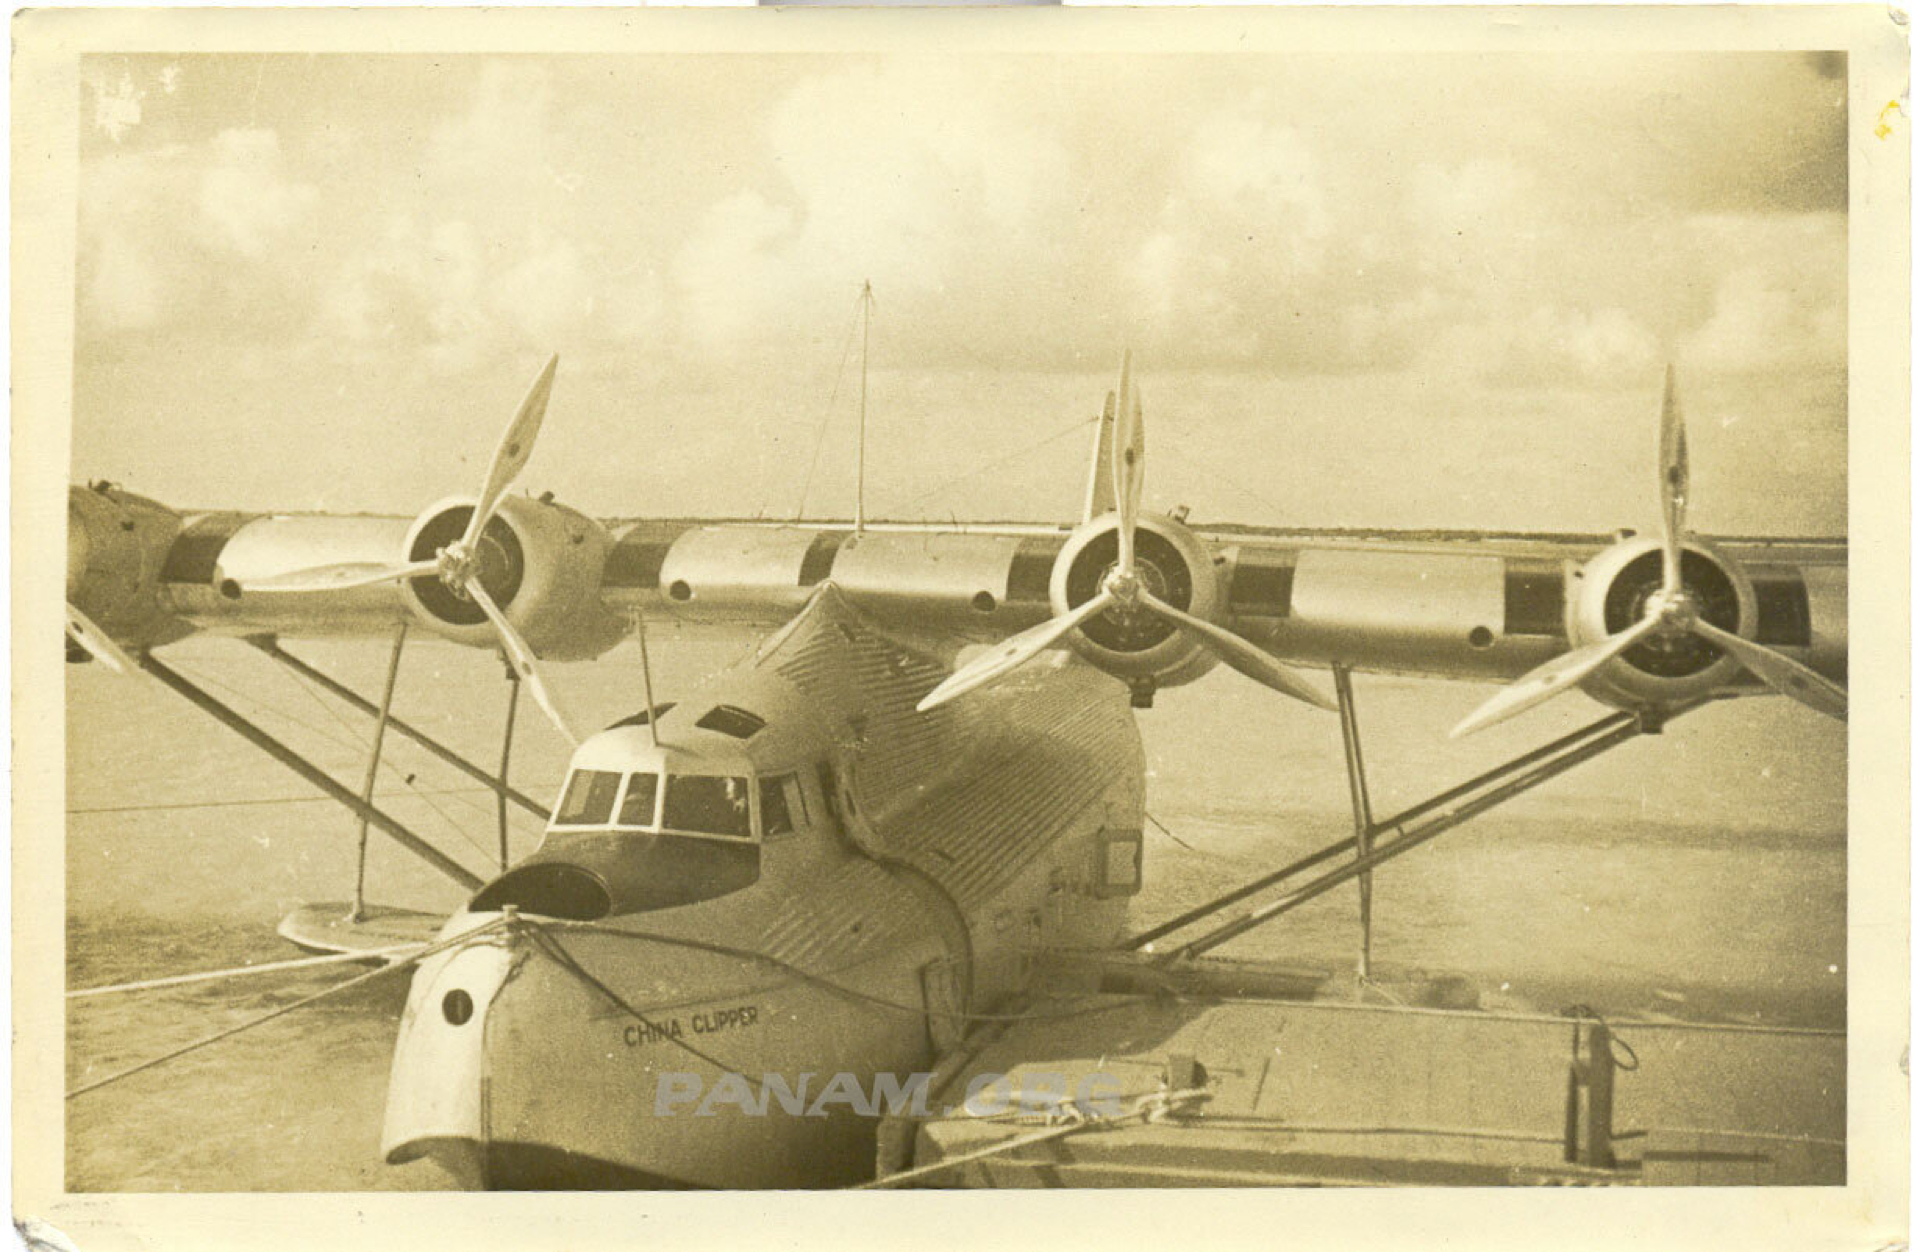 Pan Am M-130 China Clipper at Wake 1936 William Voortmeyer/PAHF Collection